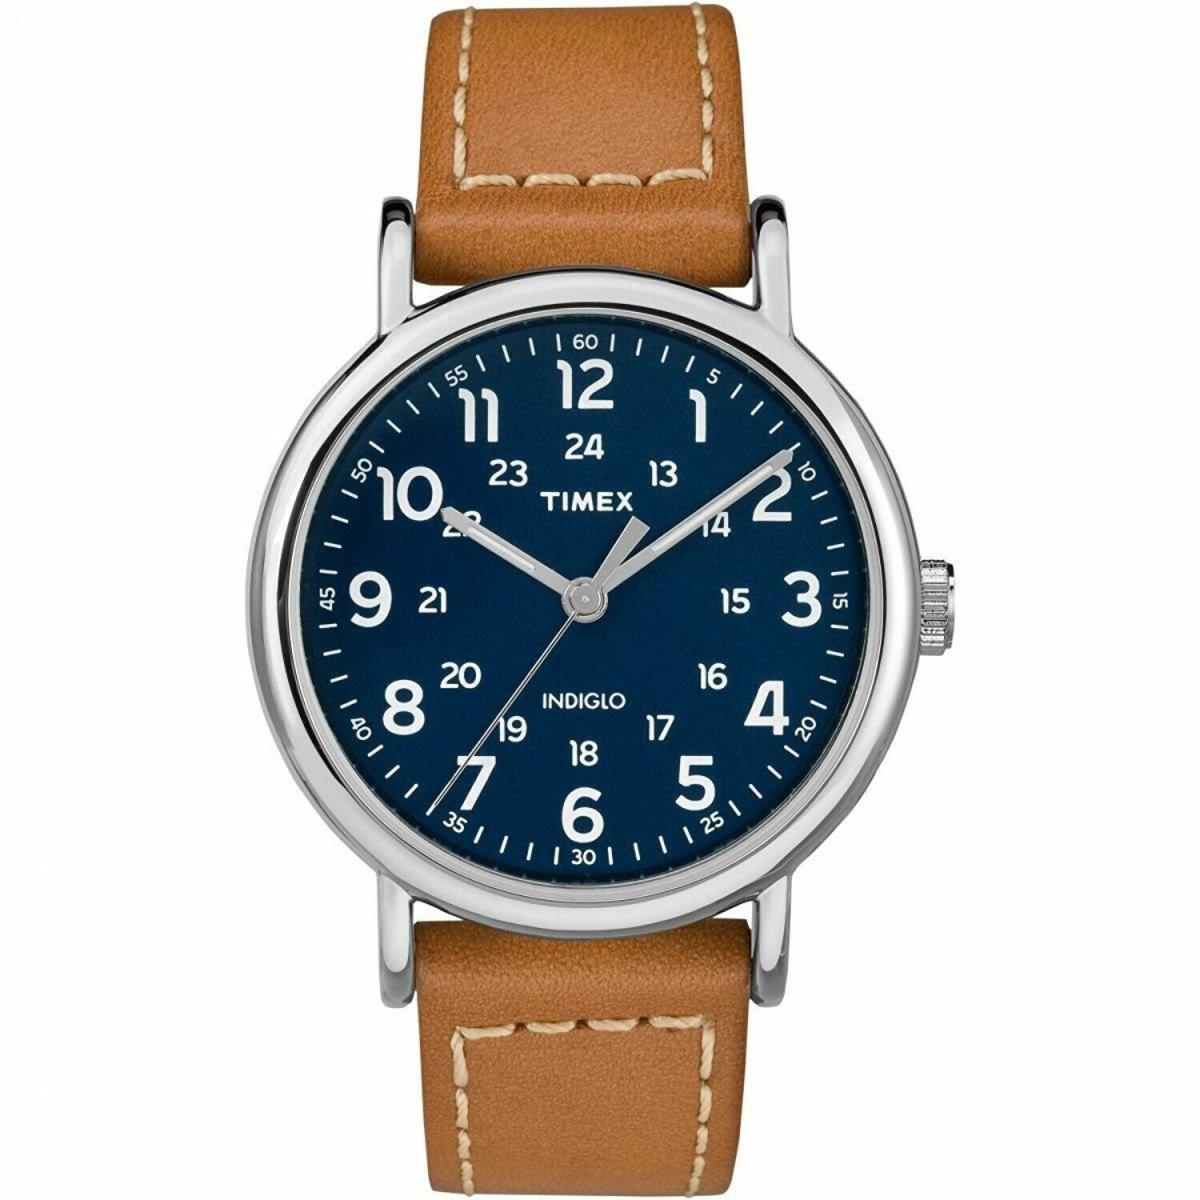 Timex TW2R42500 Weekender Brown Leather Strap Watch Indiglo 40MM Case - Dial: Blue, Band: Brown